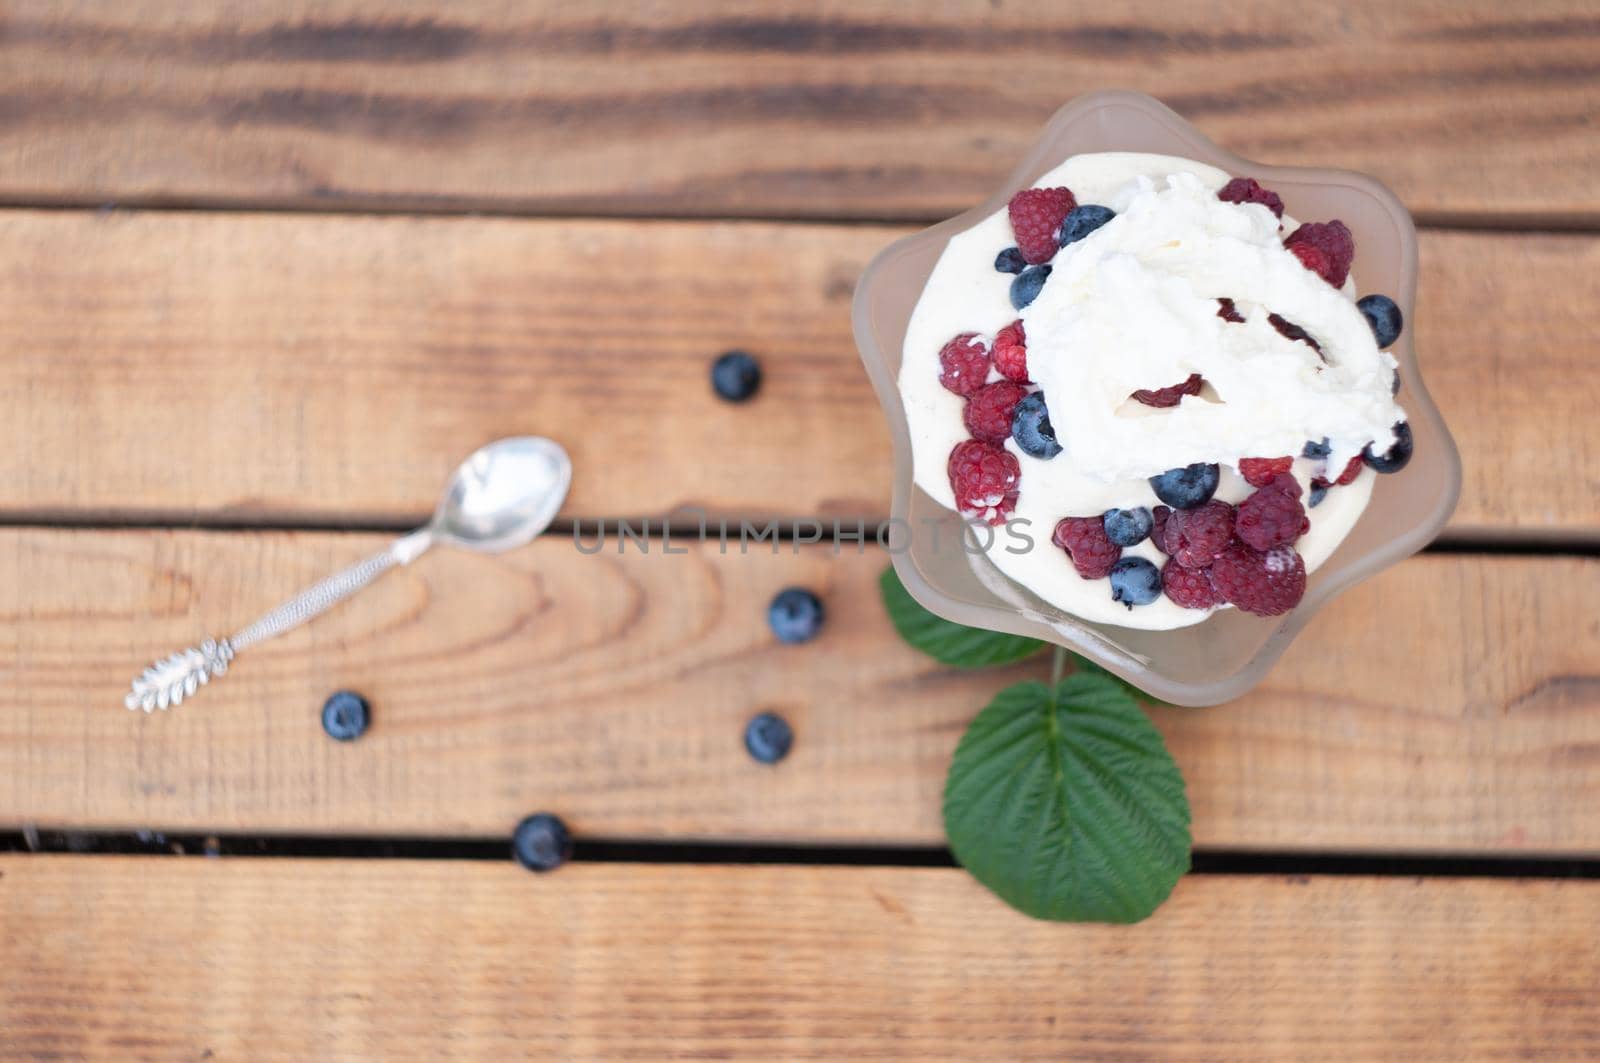 Vanilla ice cream with fresh berries and whipped cream, summer dessert by KaterinaDalemans